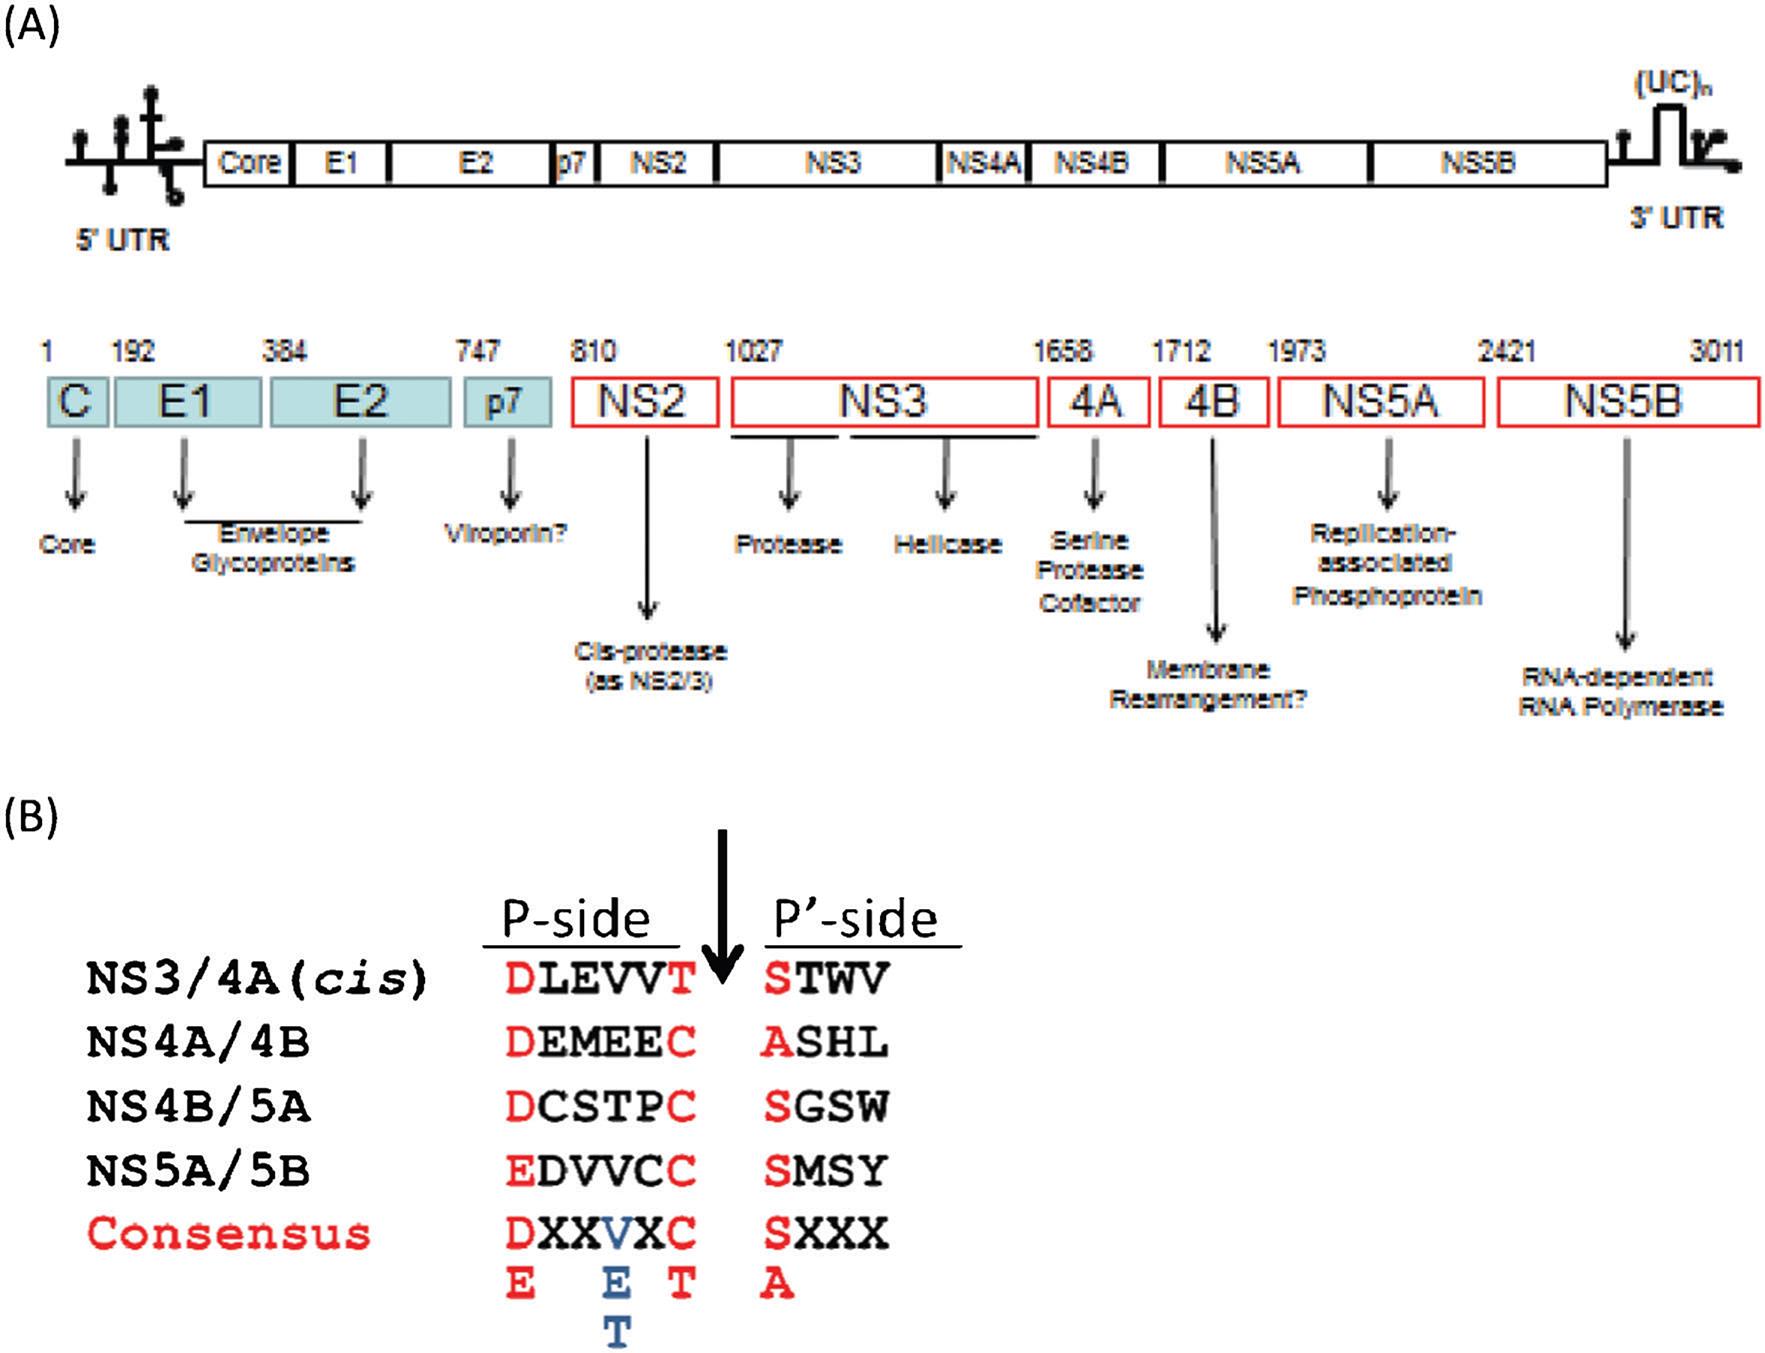 HCV genome organization and biological functions